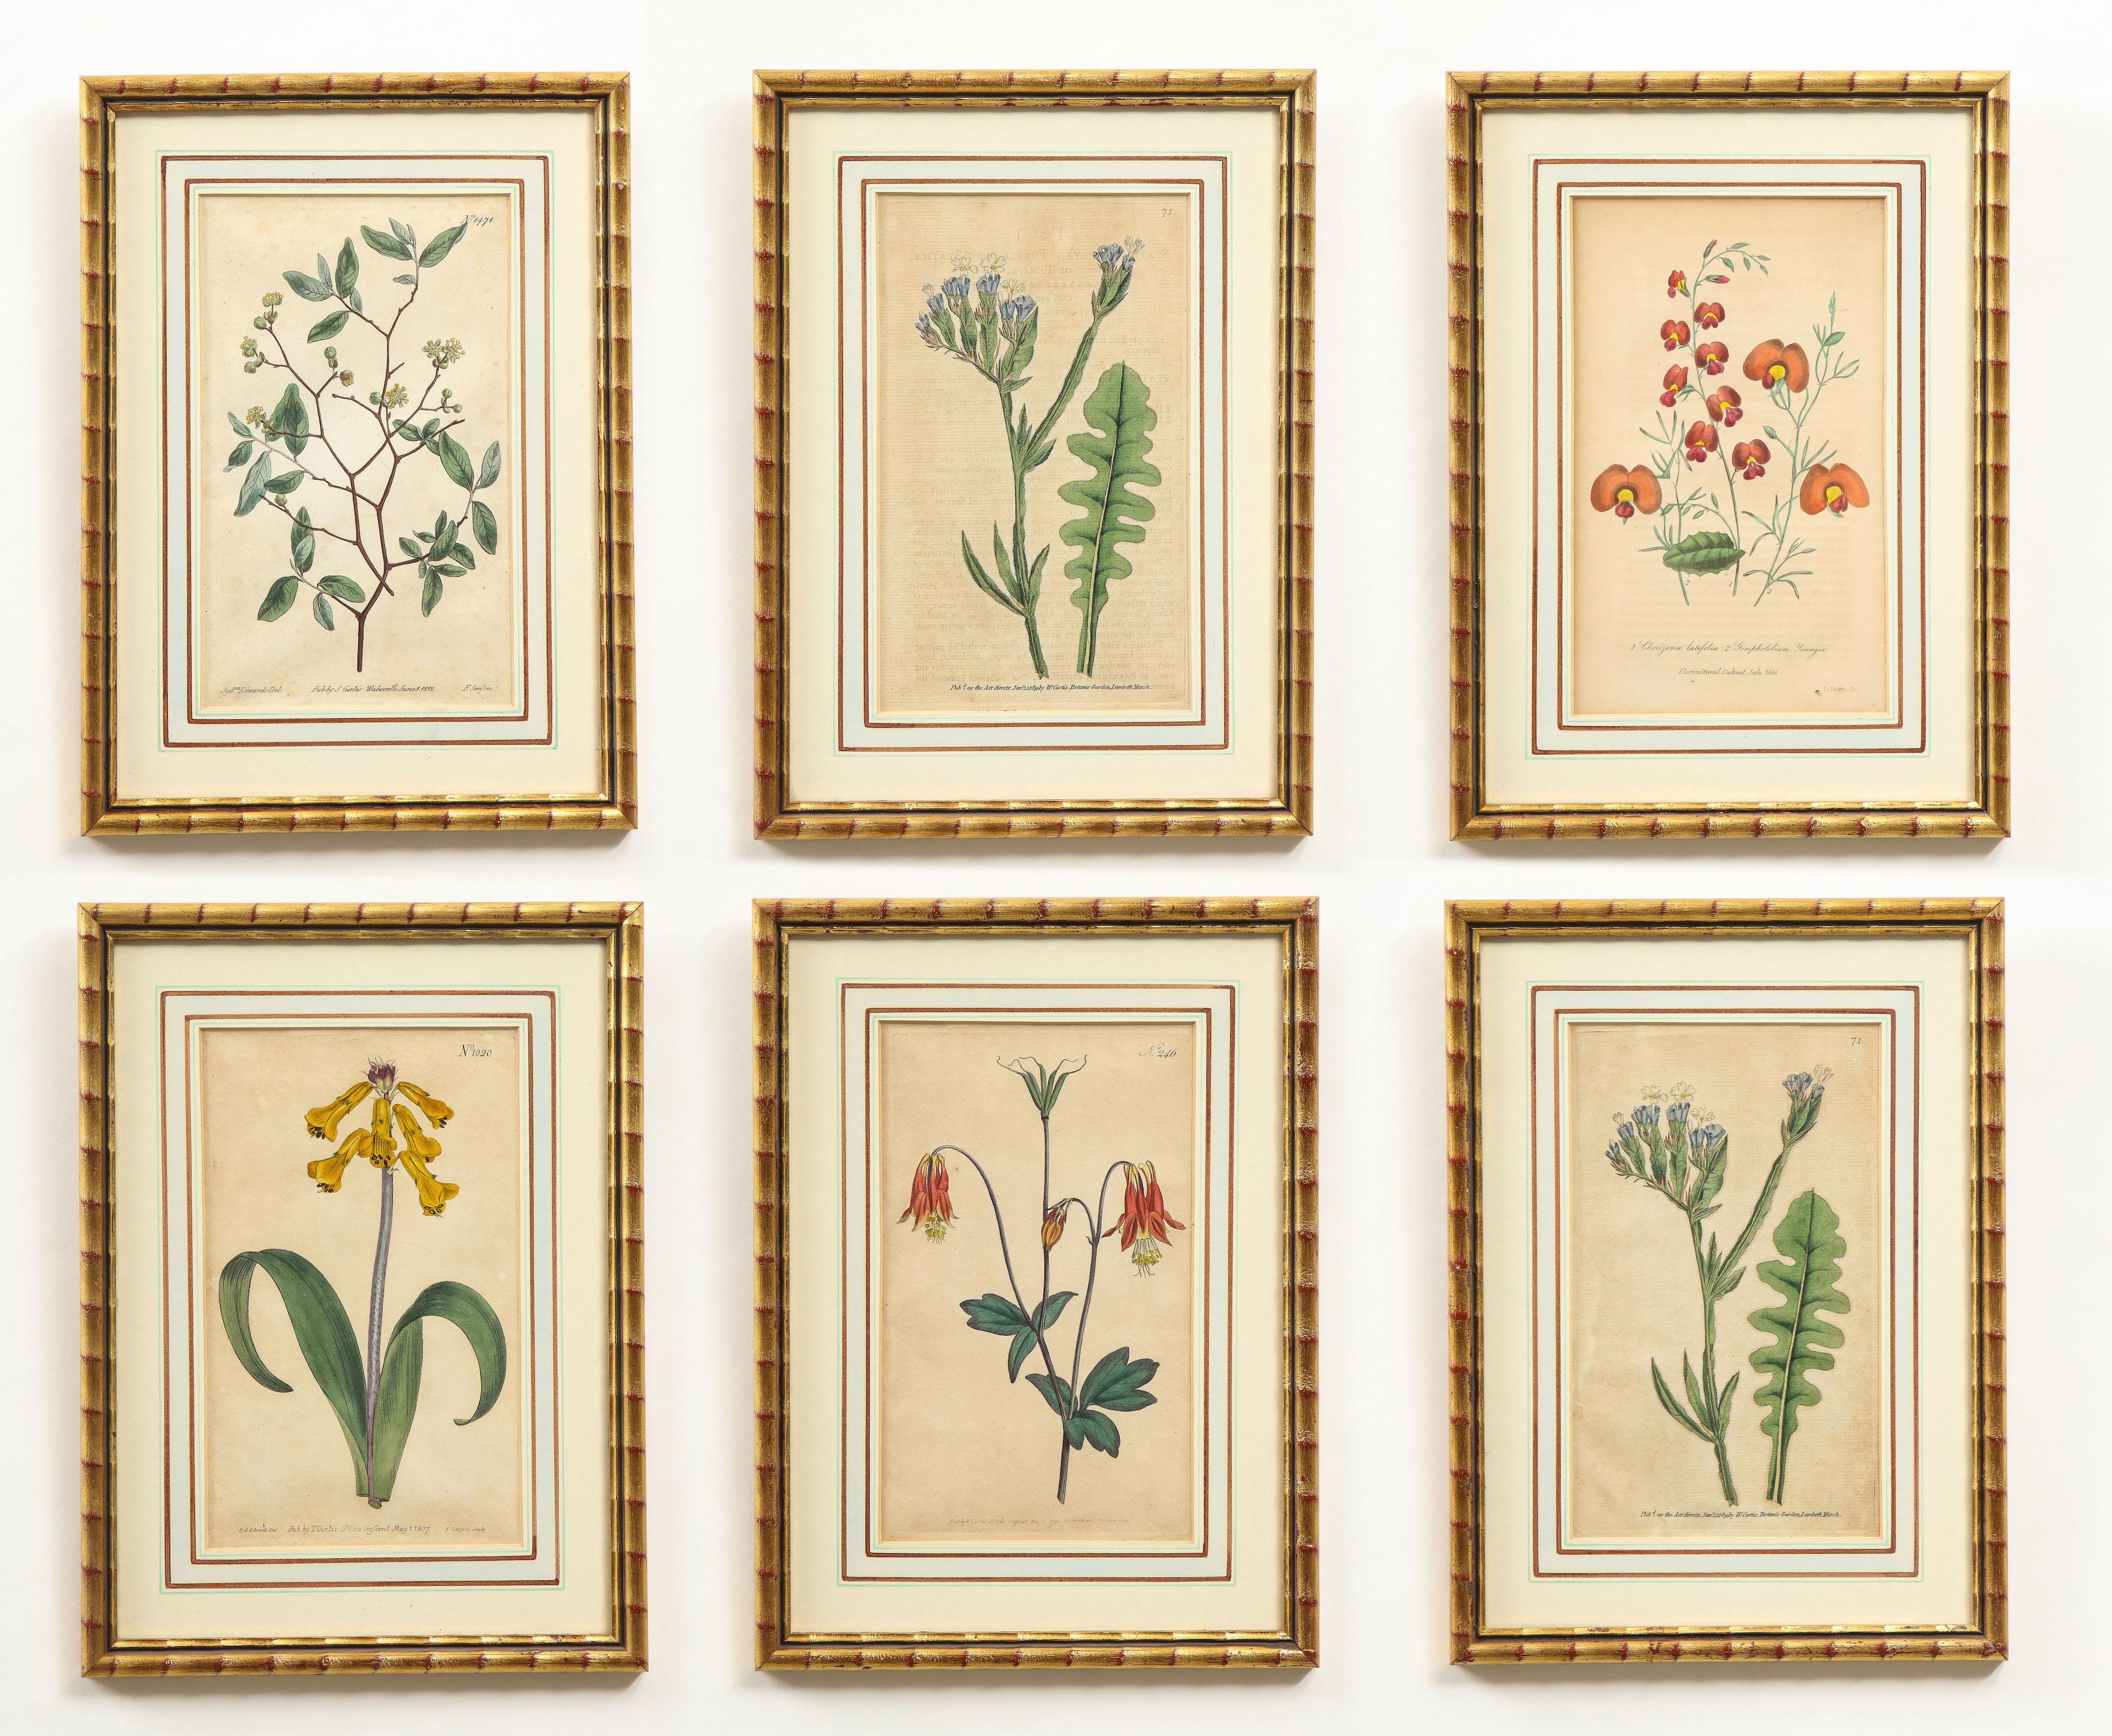 Unknown Still-Life Print - Set of Six Botanical Hand-Colored Engravings from Curtis's Botanical Magazine